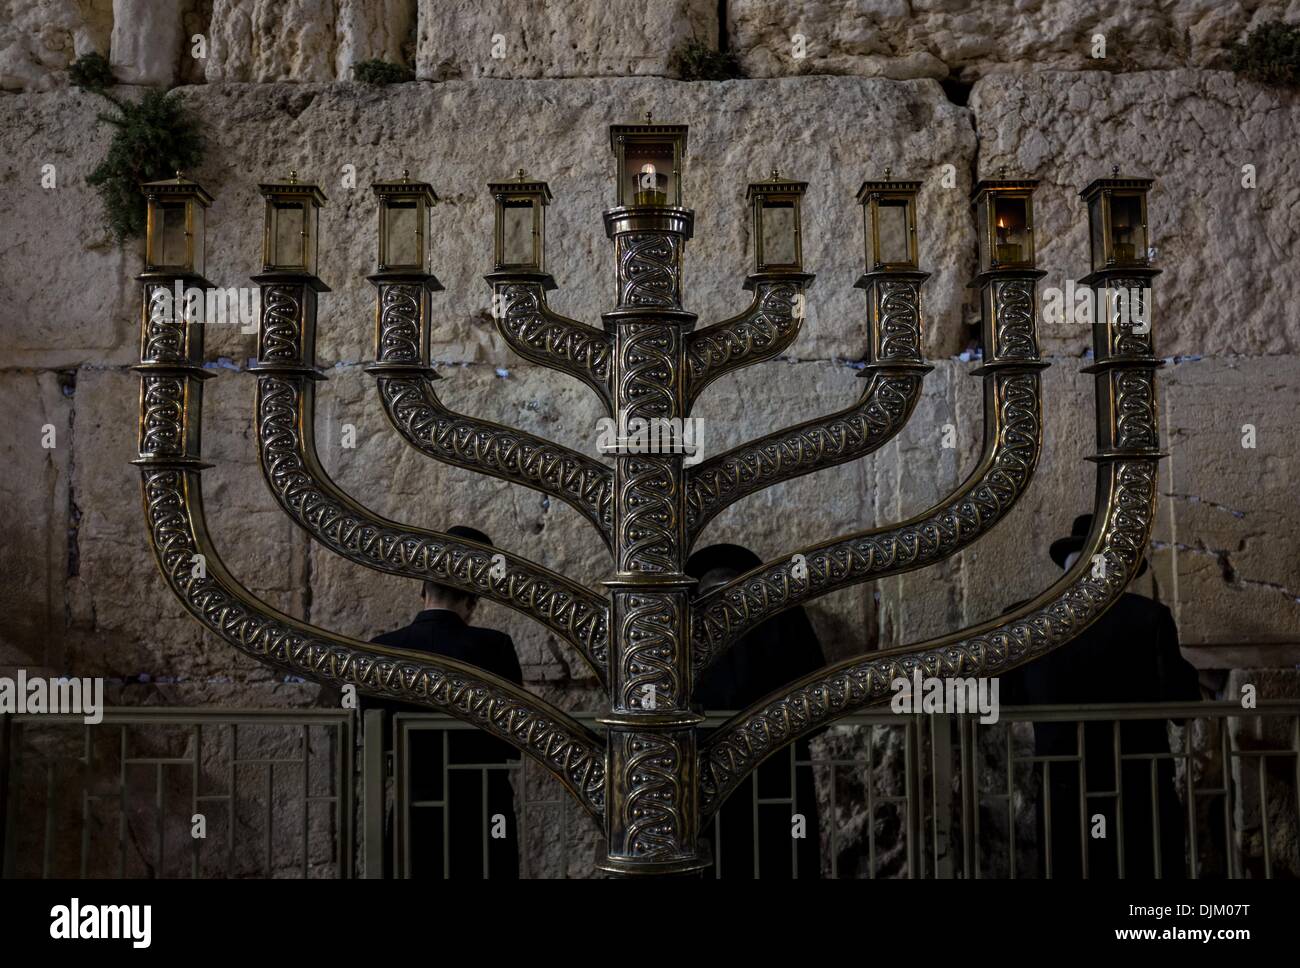 Orthodox Jews pray to mark Hanukkah behind a large-sized Hannukiya at the Western Wall in the Old City of Jerusalem, on Nov. 28, 2013. Hanukkah, also known as the Festival of Lights and Feast of Dedication, is an eight-day Jewish holiday commemorating the rededication of the Holy Temple (the Second Temple) in Jerusalem at the time of the Maccabean Revolt against the Seleucid Empire of the 2nd Century B.C. Hanukkah is observed for eight nights and days, starting on the 25th day of Kislev according to the Hebrew calendar, which may occur at any ti Stock Photo